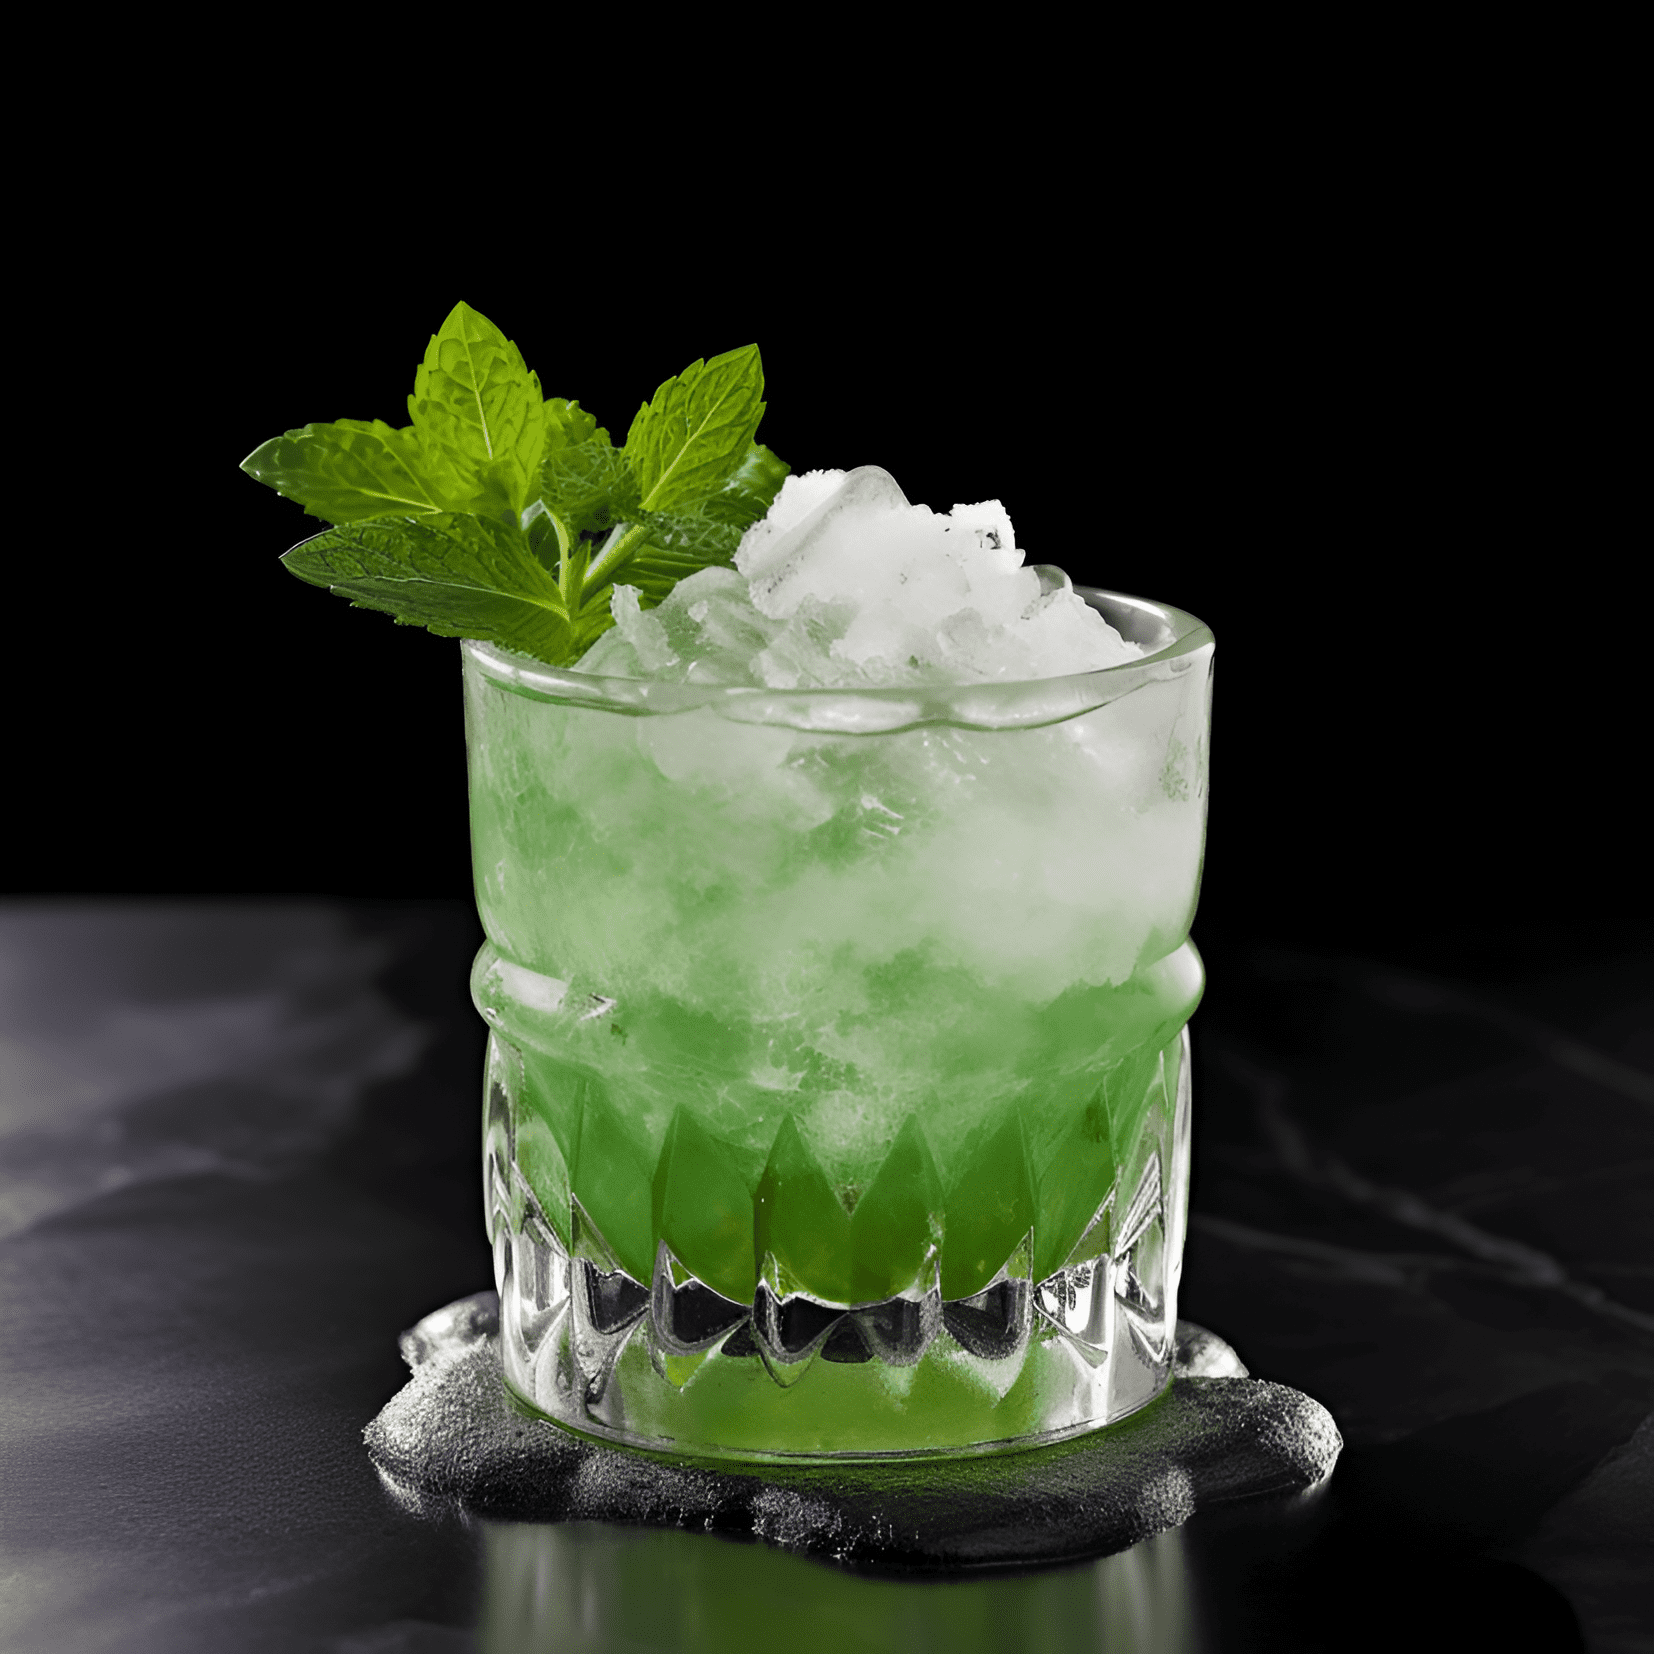 The Basil Smash is a refreshing, herbaceous, and slightly sweet cocktail with a hint of tartness from the lemon juice. The gin adds a layer of complexity with its botanical flavors, while the simple syrup balances the acidity of the lemon.